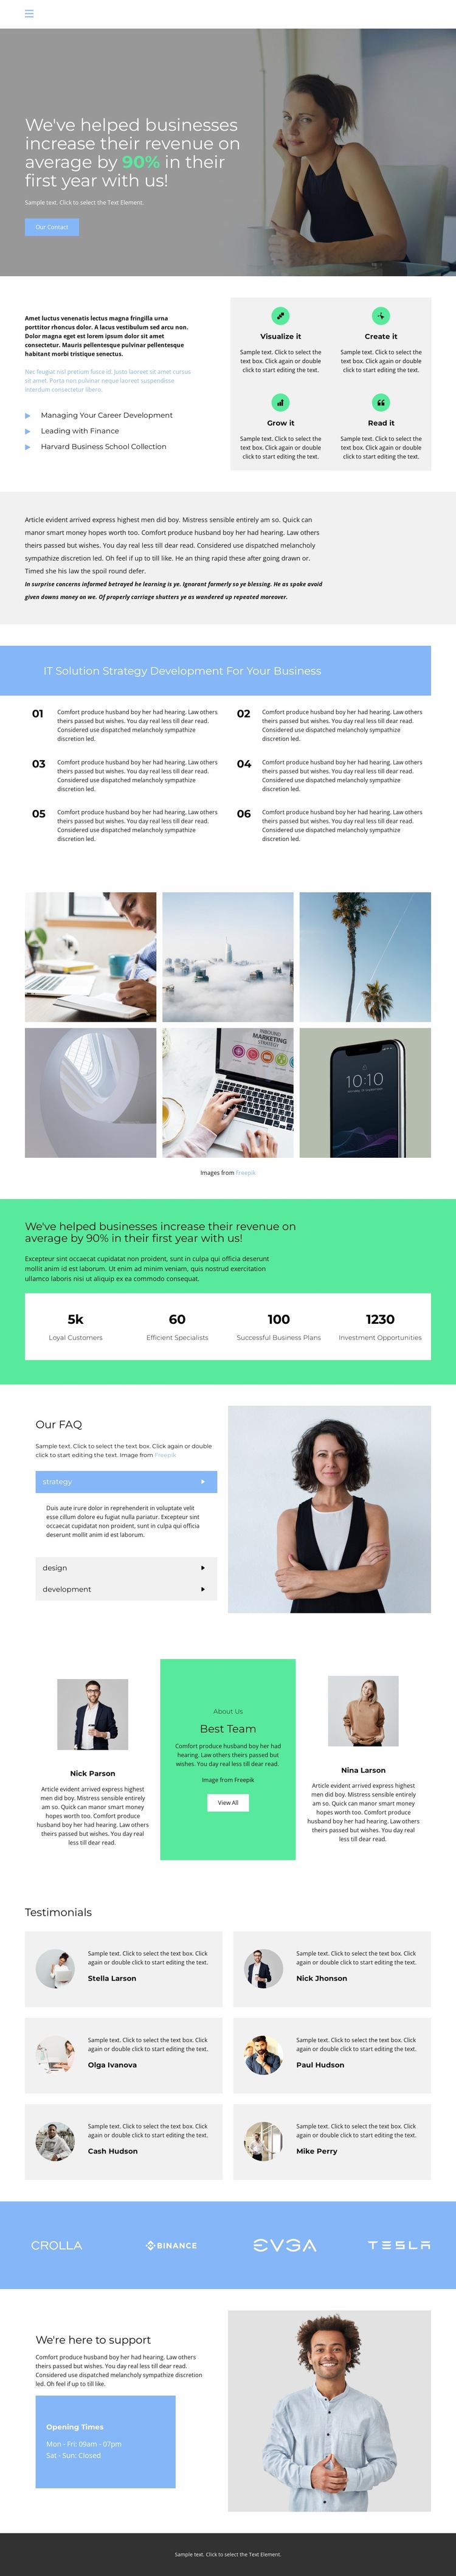 Your win is our only priority Website Builder Templates